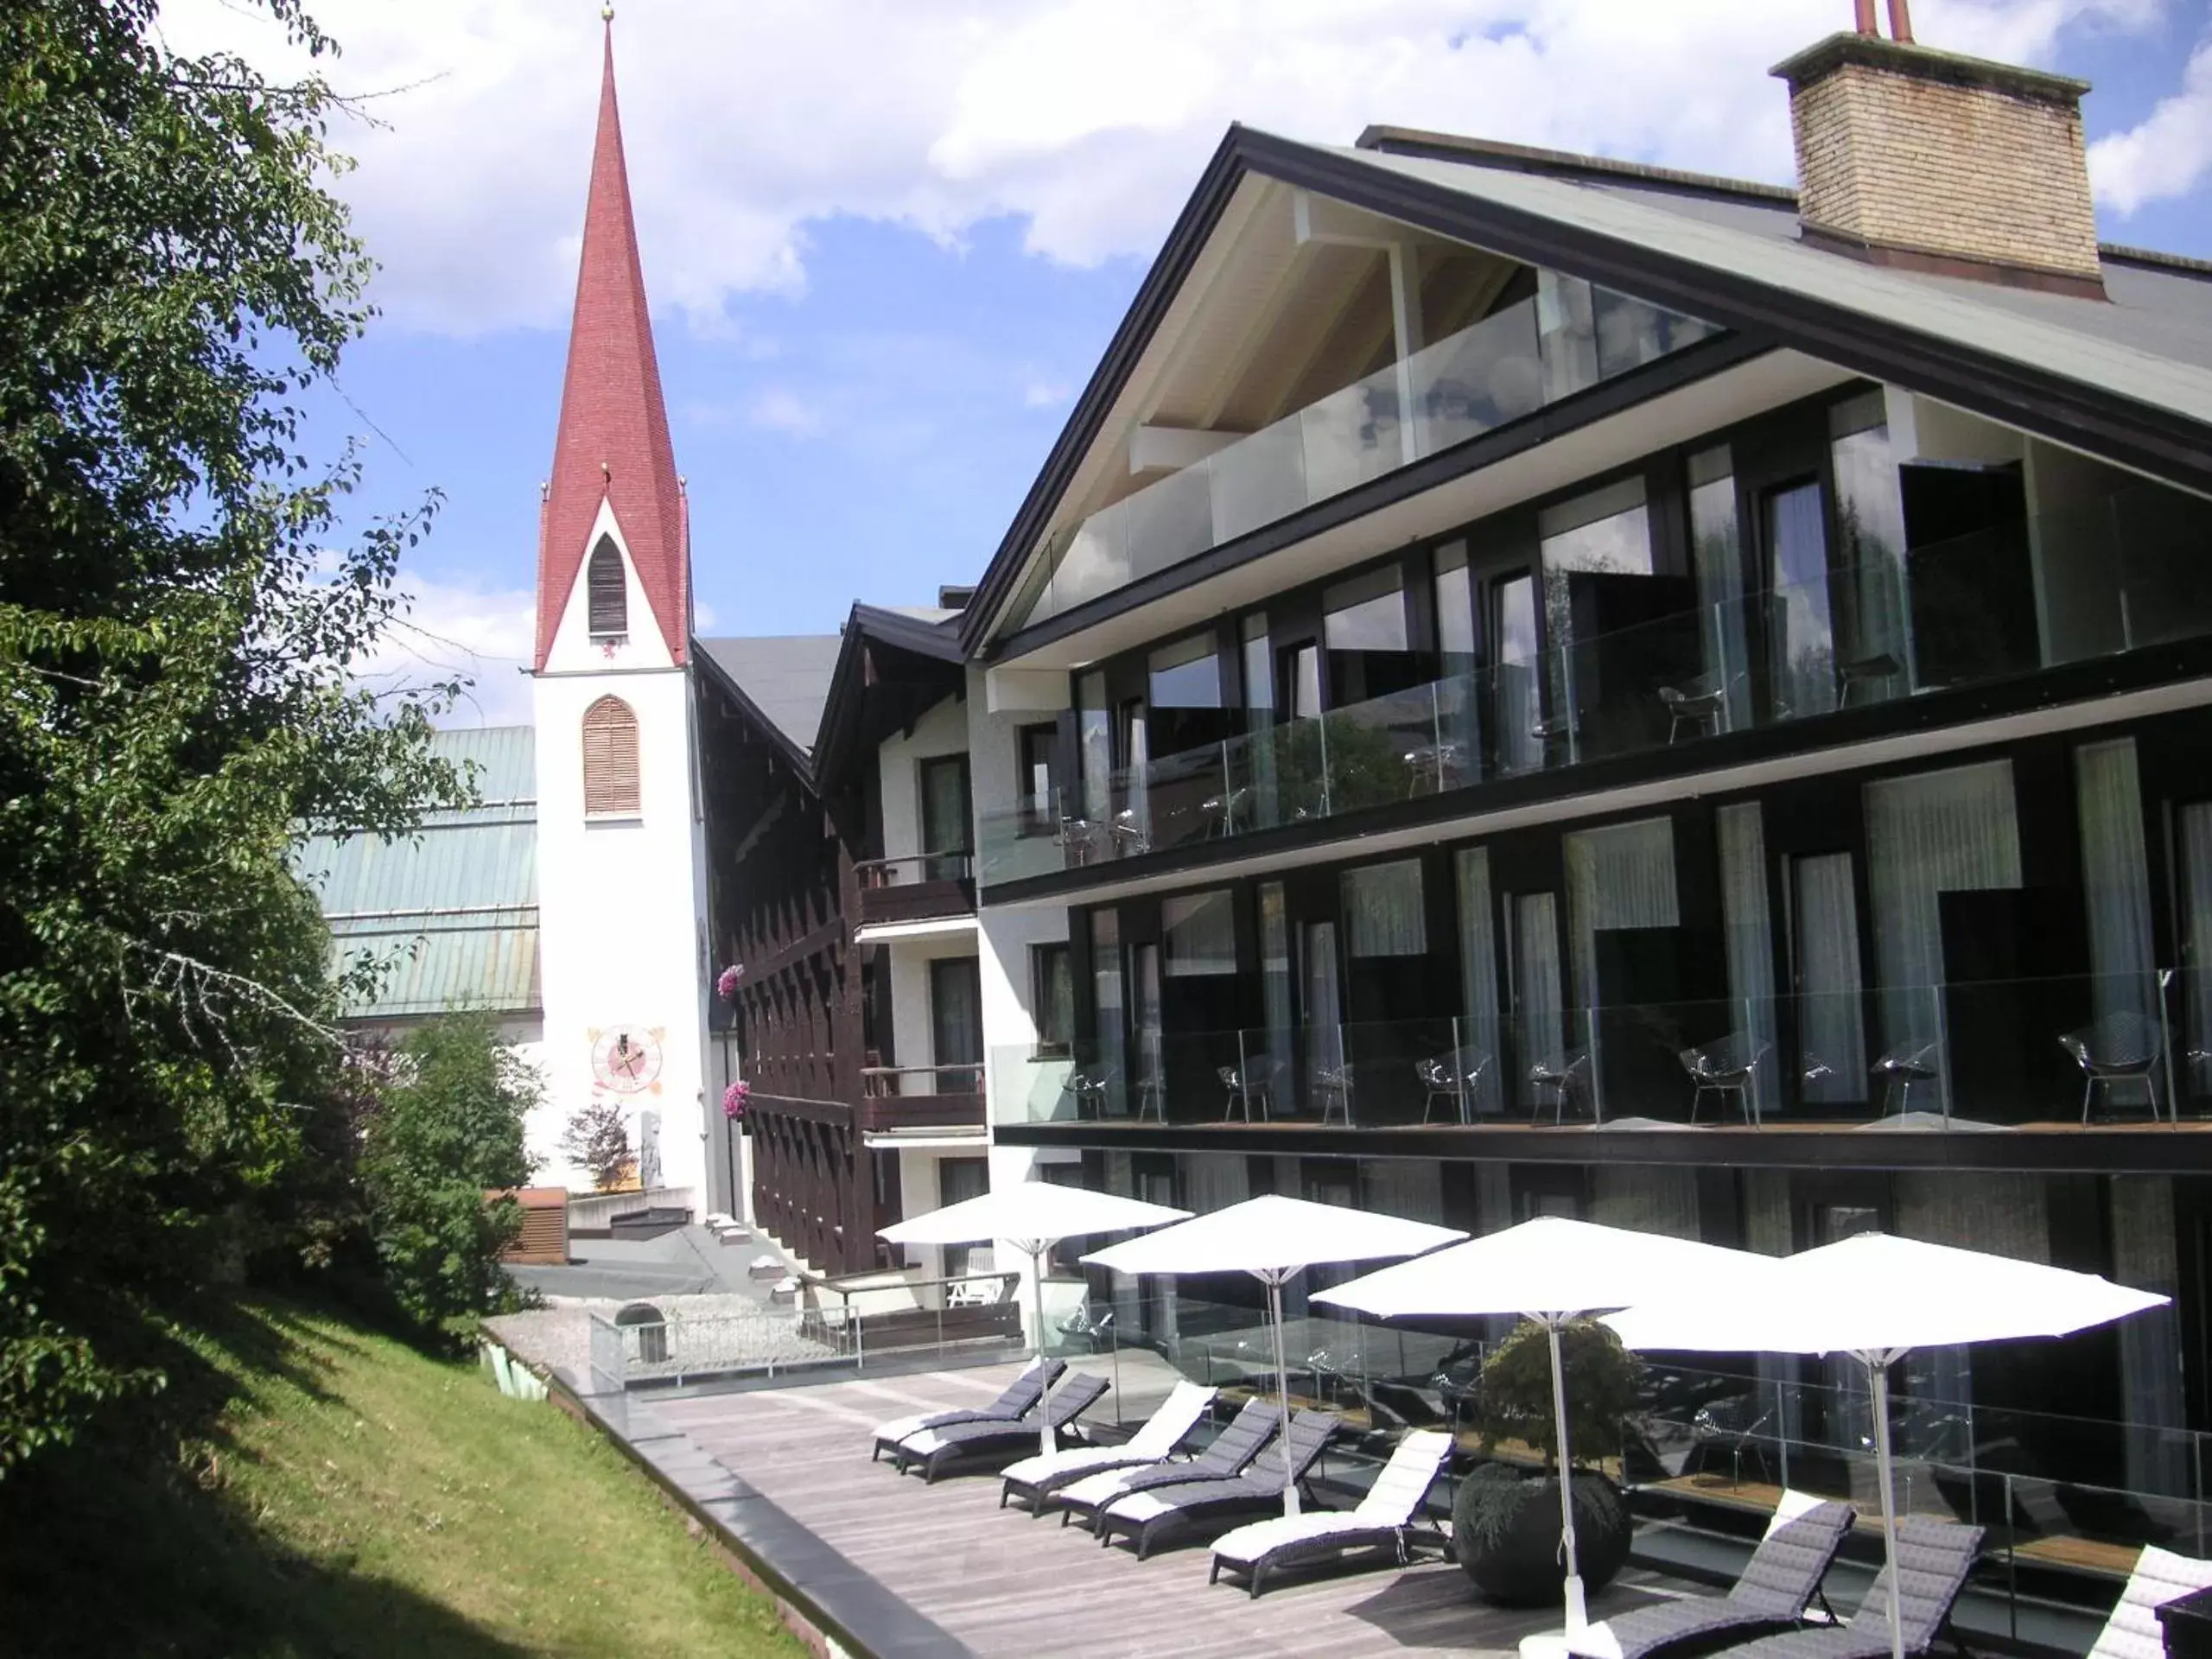 Patio, Property Building in Alpenlove - Adult SPA Hotel